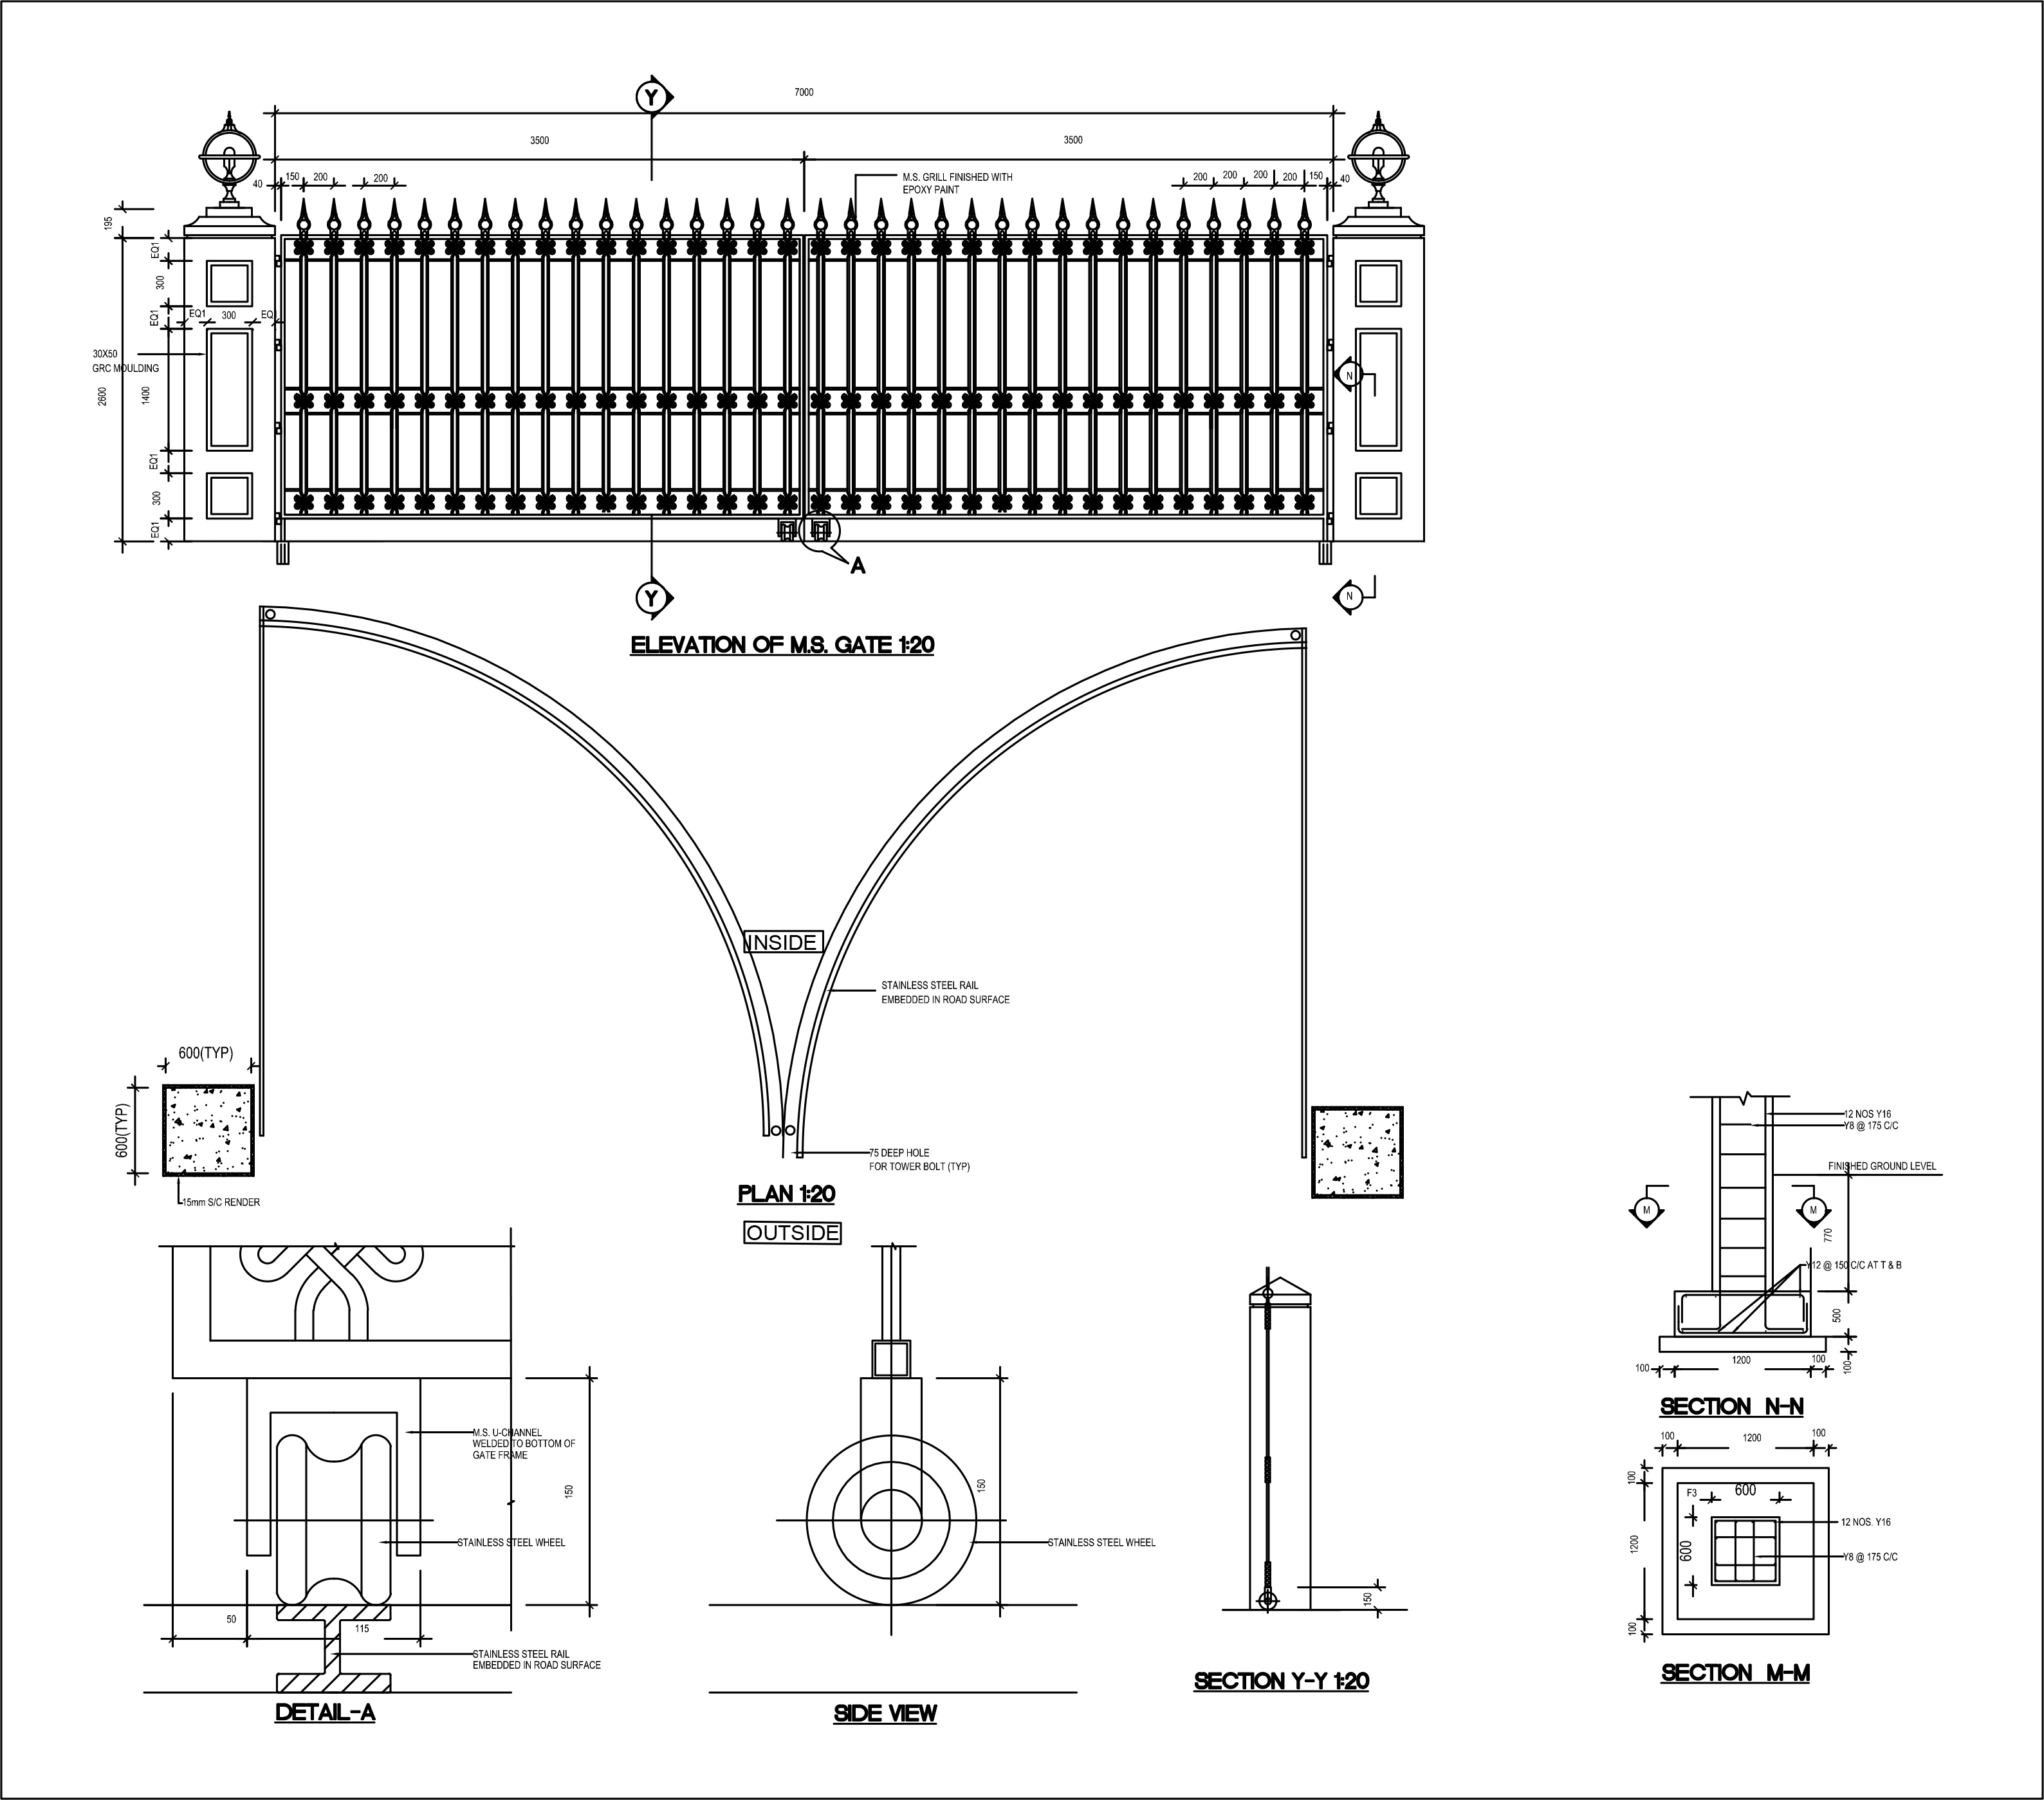 2d Cad Drawings Of The Entrance Gate And Footing Stru vrogue.co